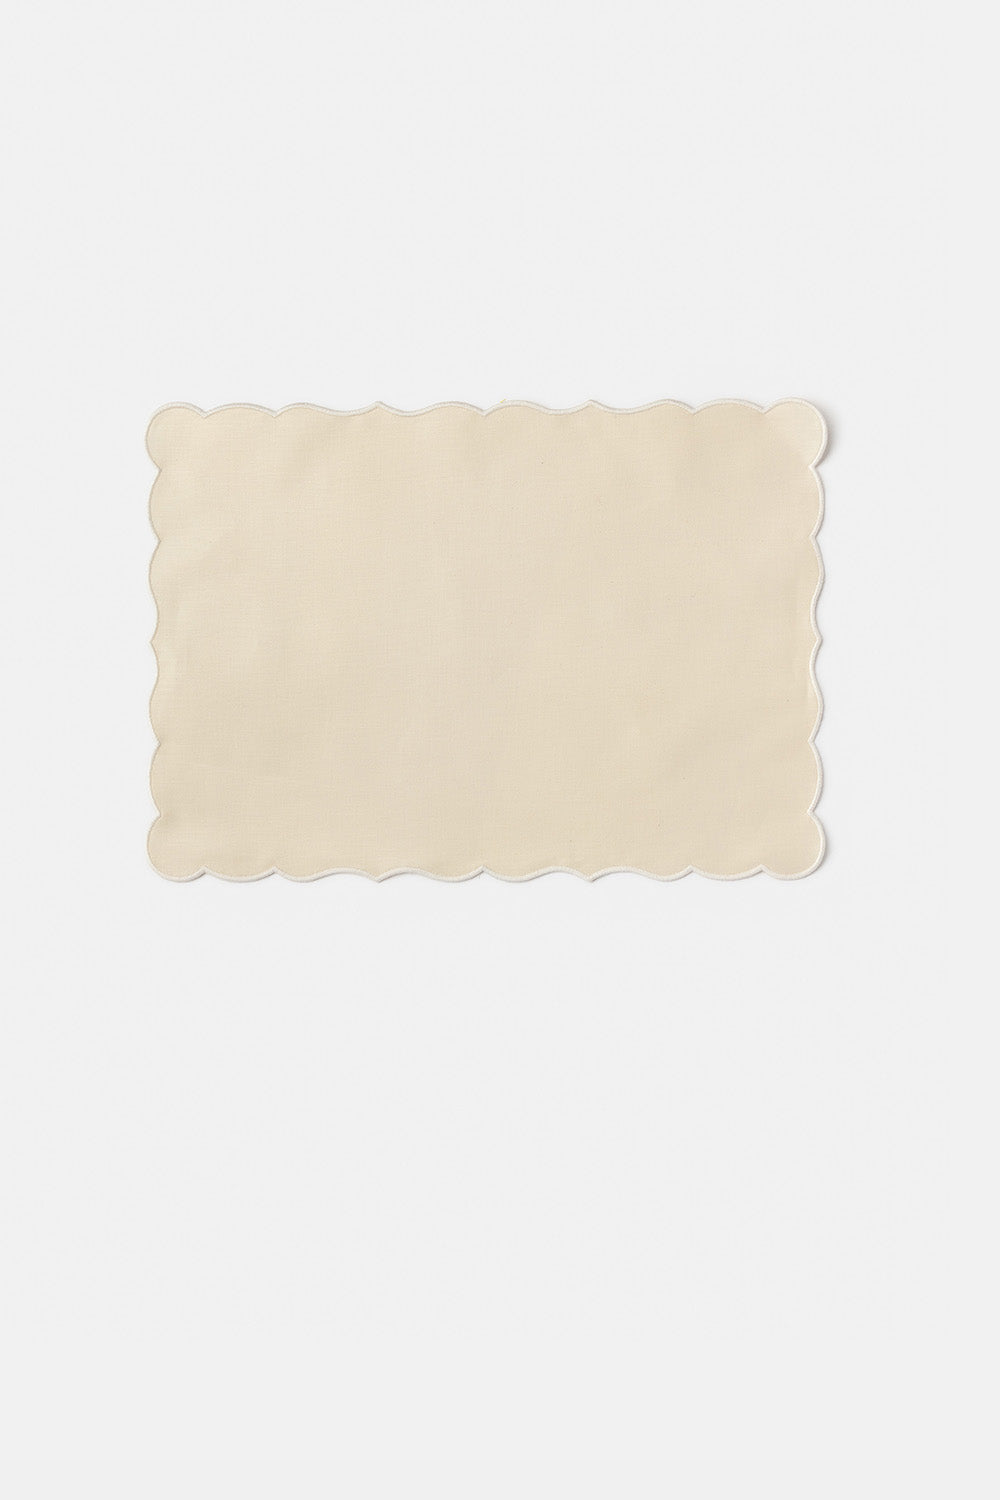 "Lido" placemat in Ivory / White